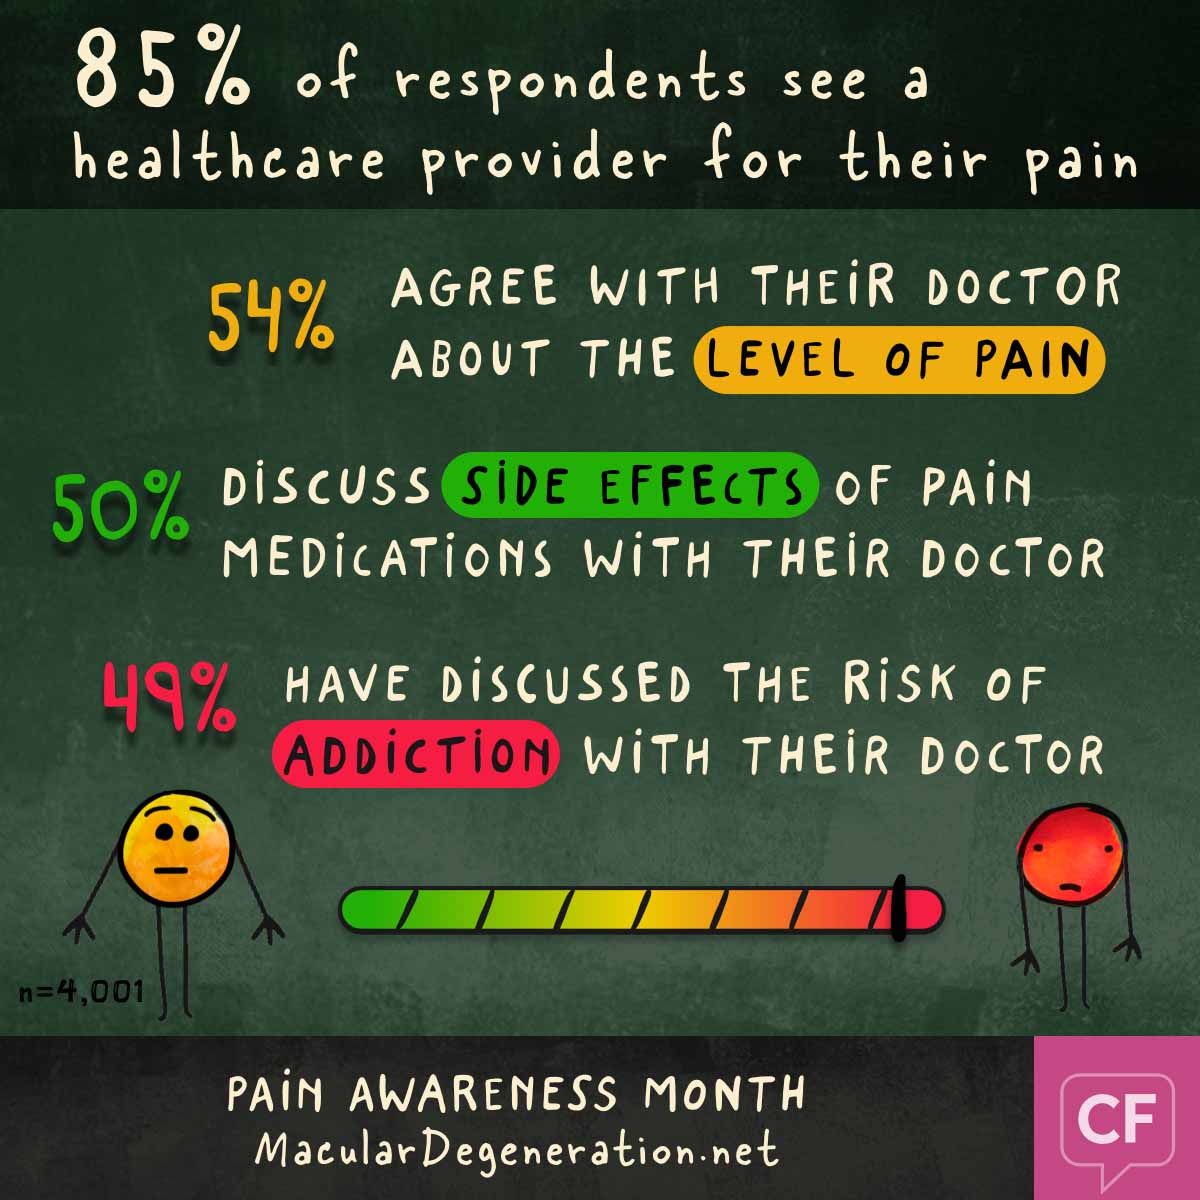 85% see a healthcare provider for pain and about half agree with them on level of pain, and discuss side effects and addiction